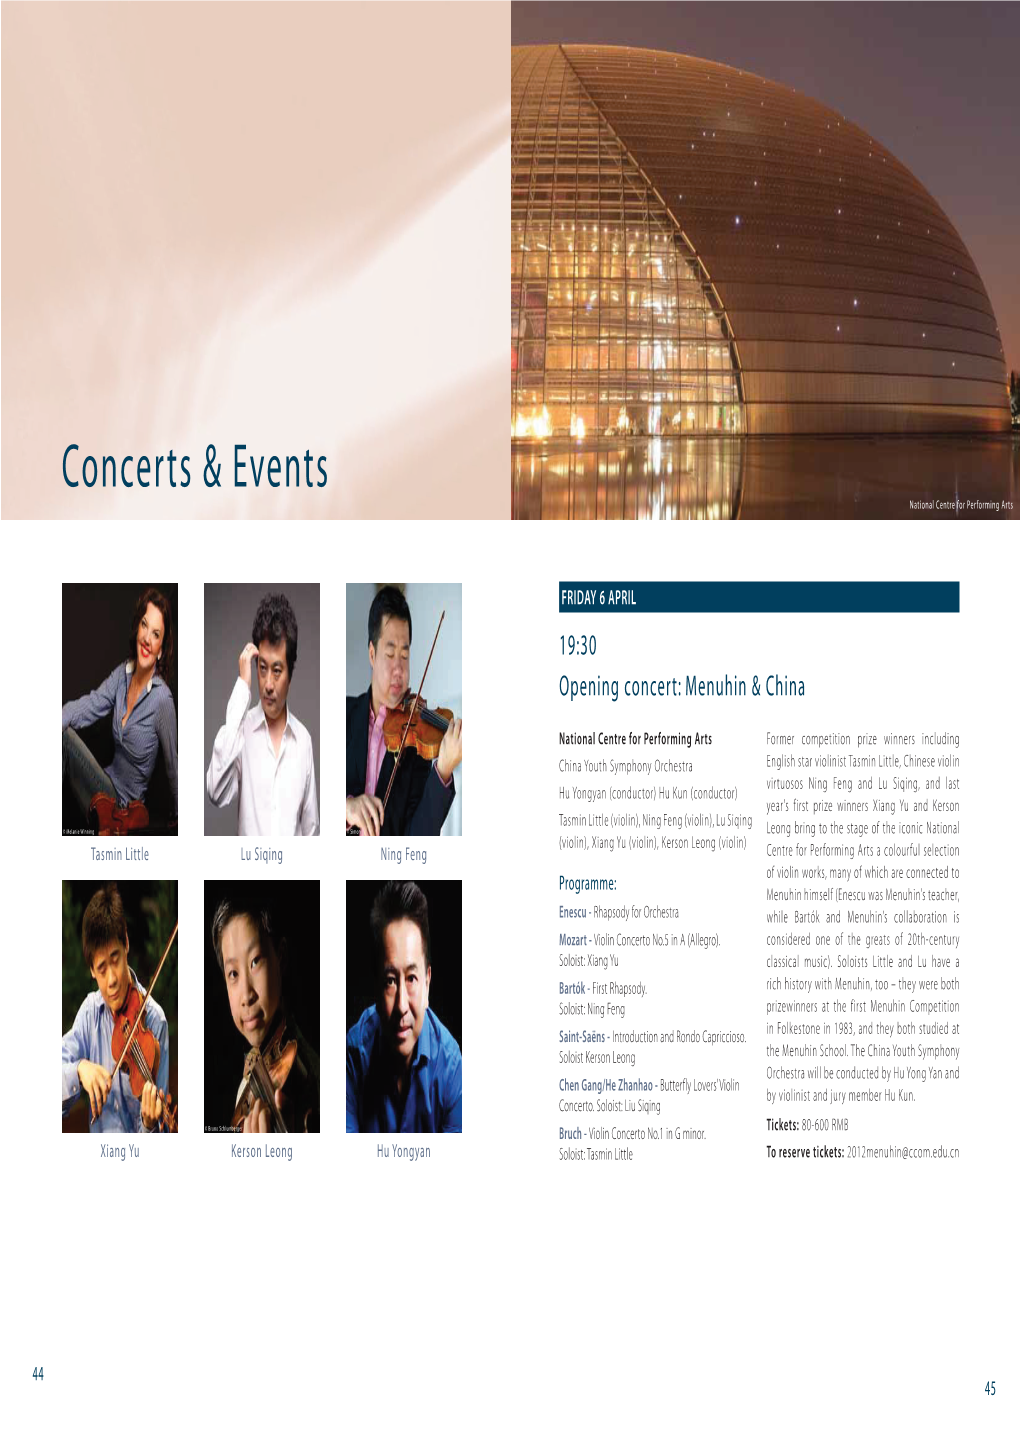 Concerts & Events